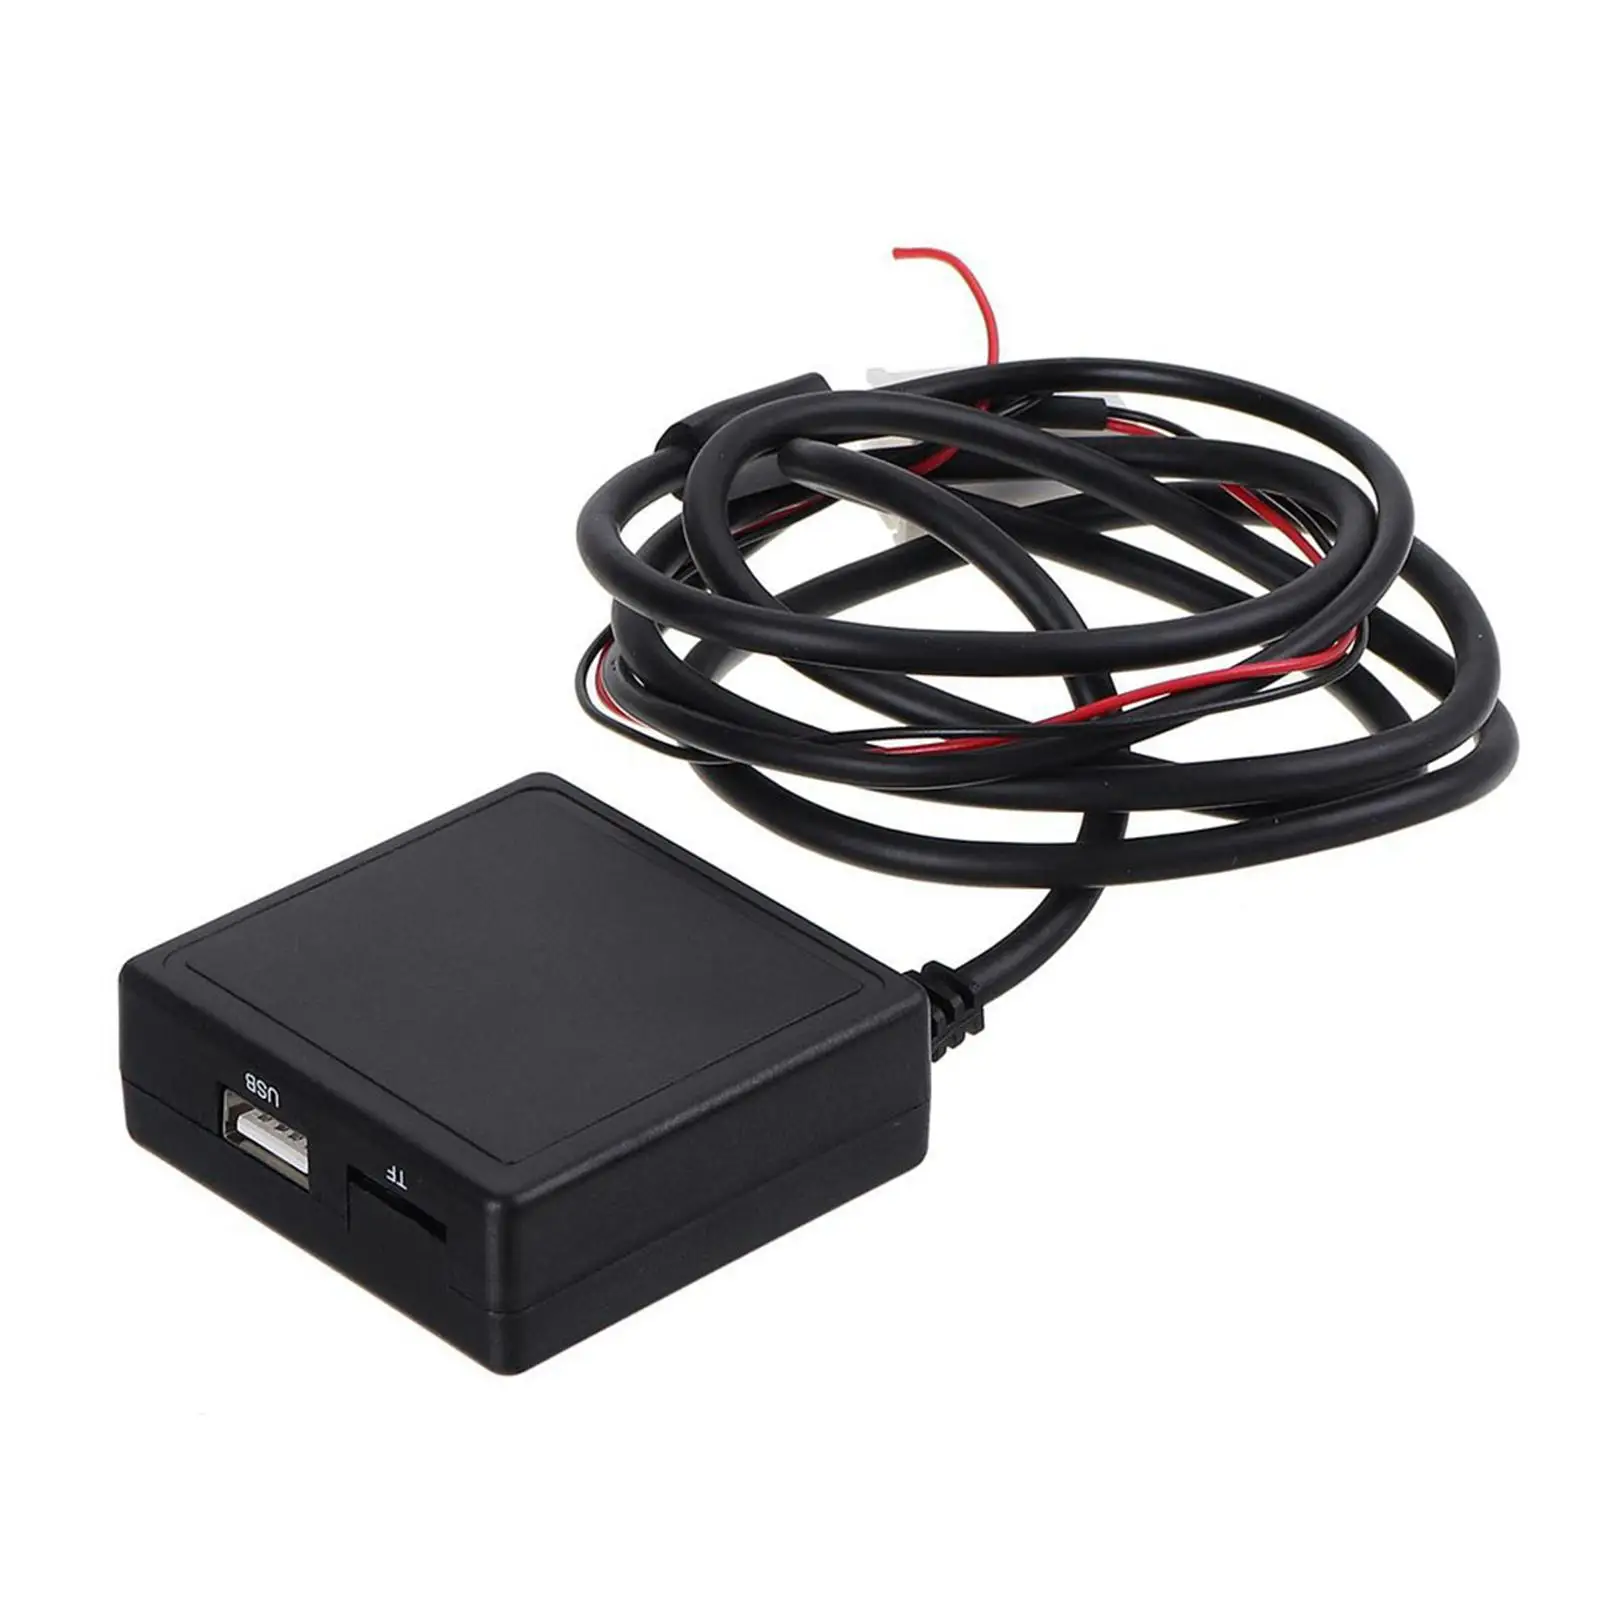 Auxiliary Audio Converter Support Handsfree Call with Microphone for E90 E60